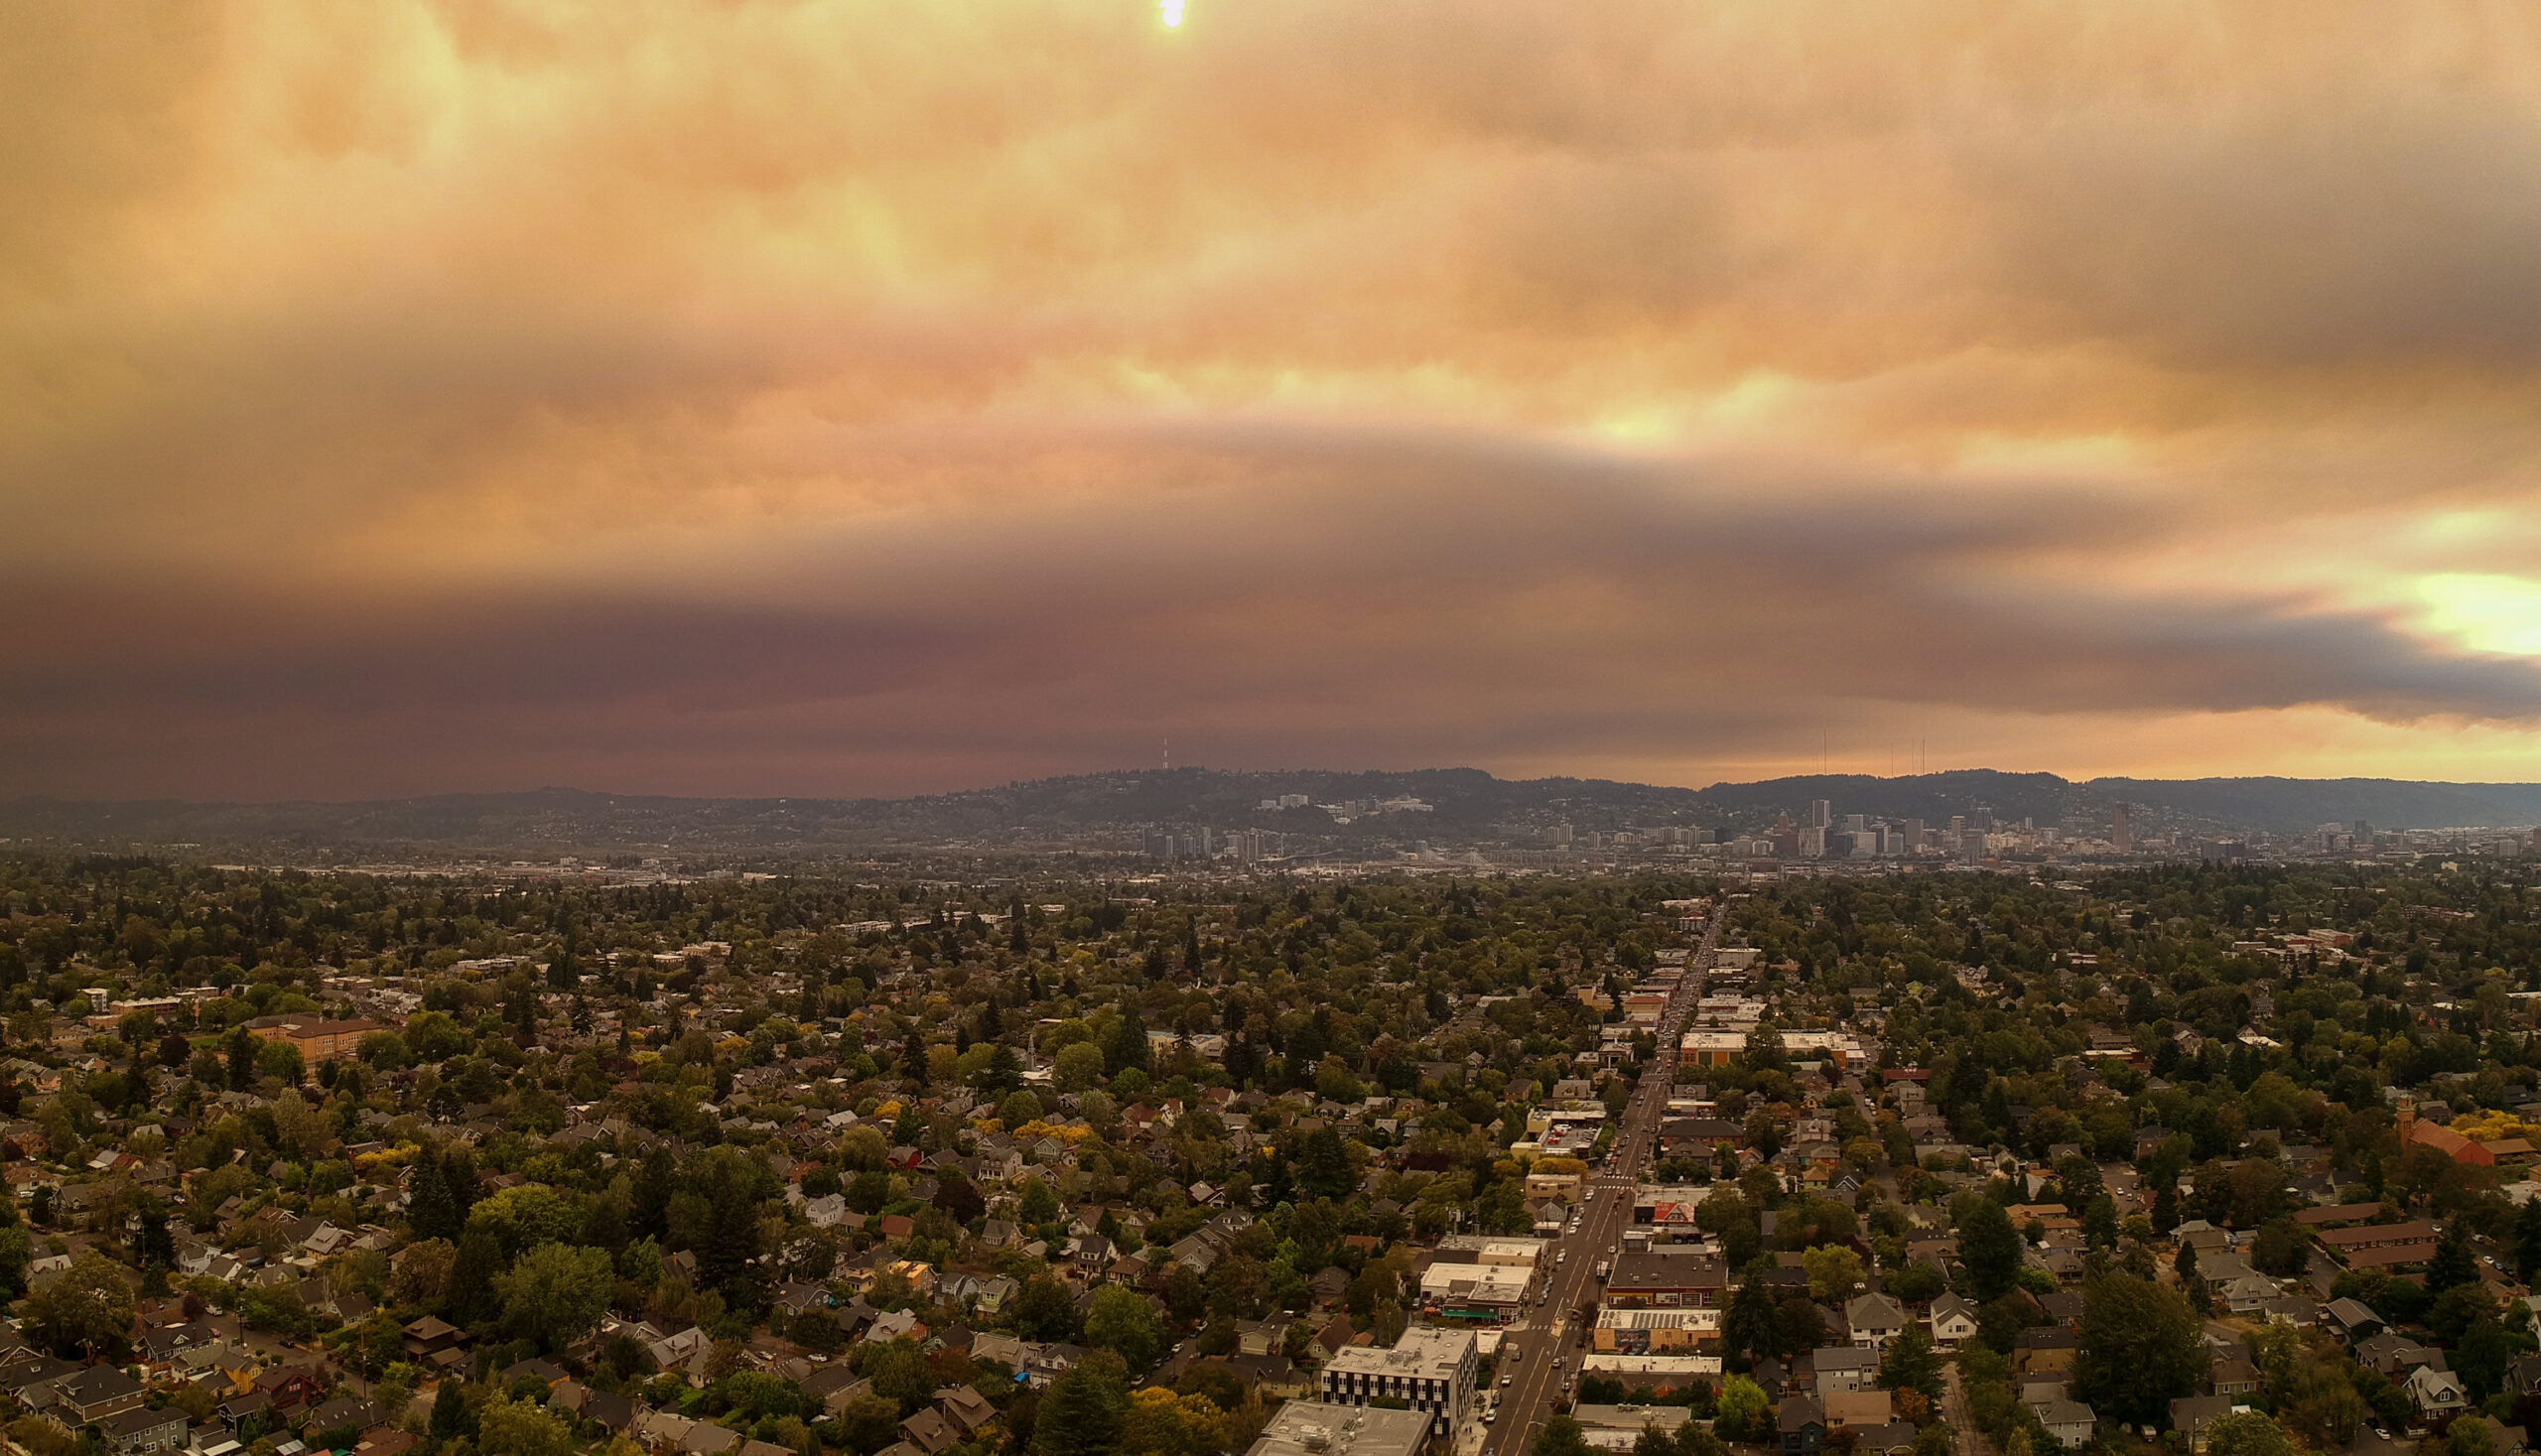 Portland's sky turned orange as the 2020 Oregon wildfires approached.